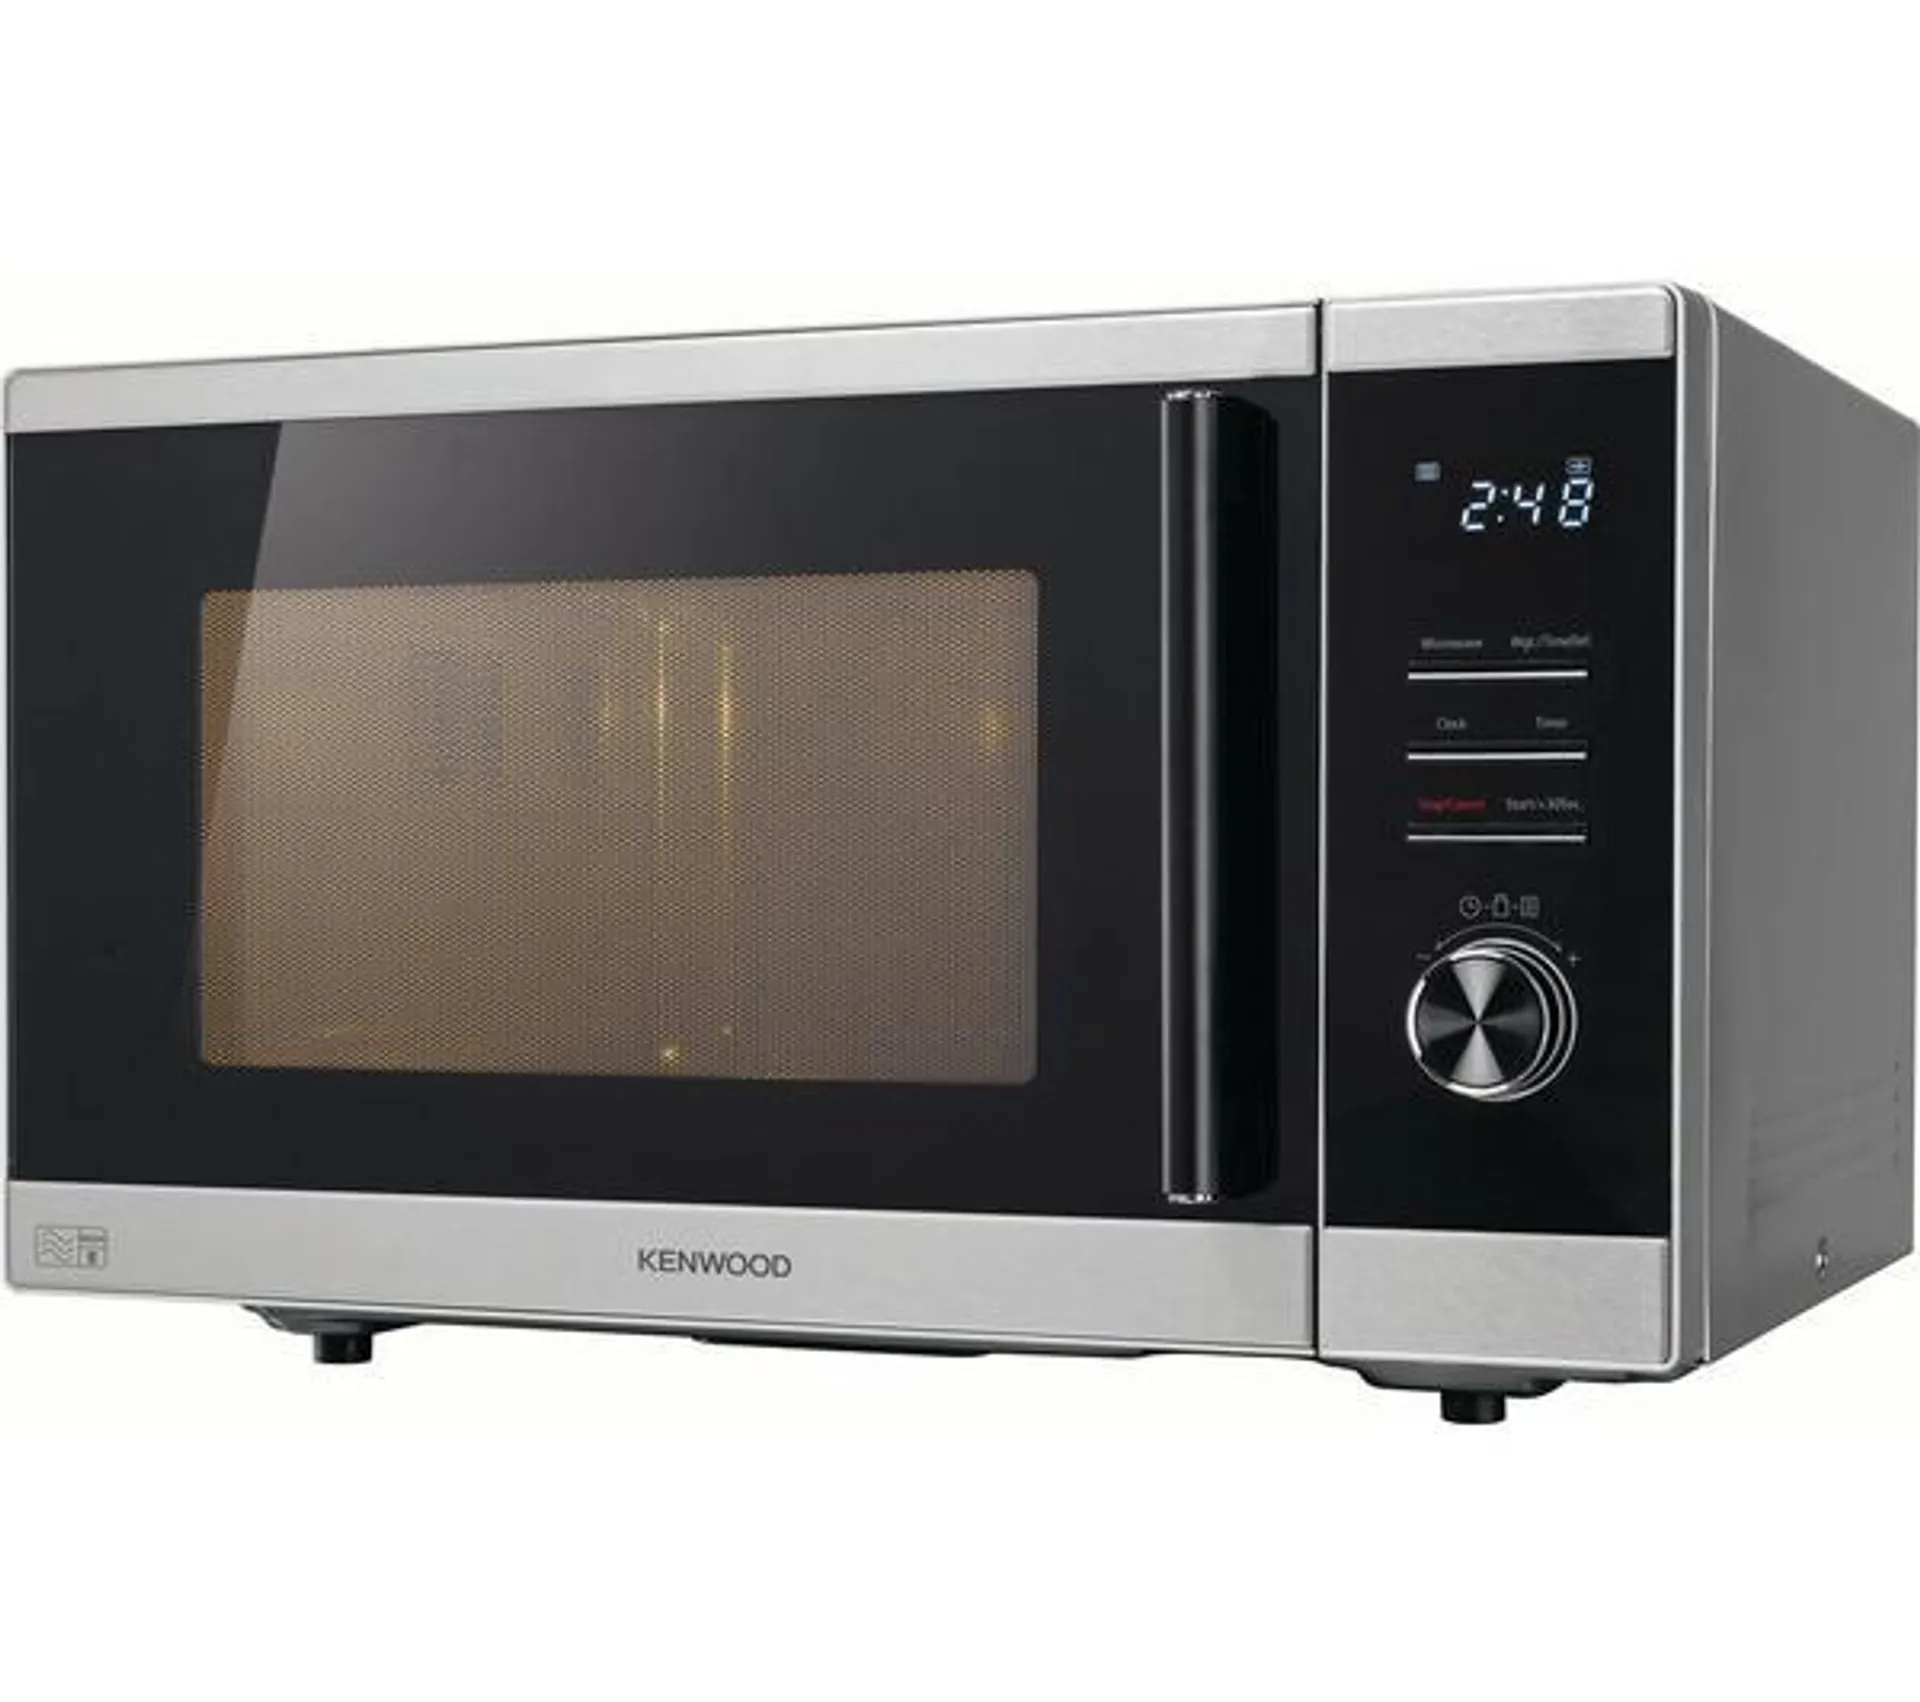 KENWOOD K25MSS21 Solo Microwave - Silver